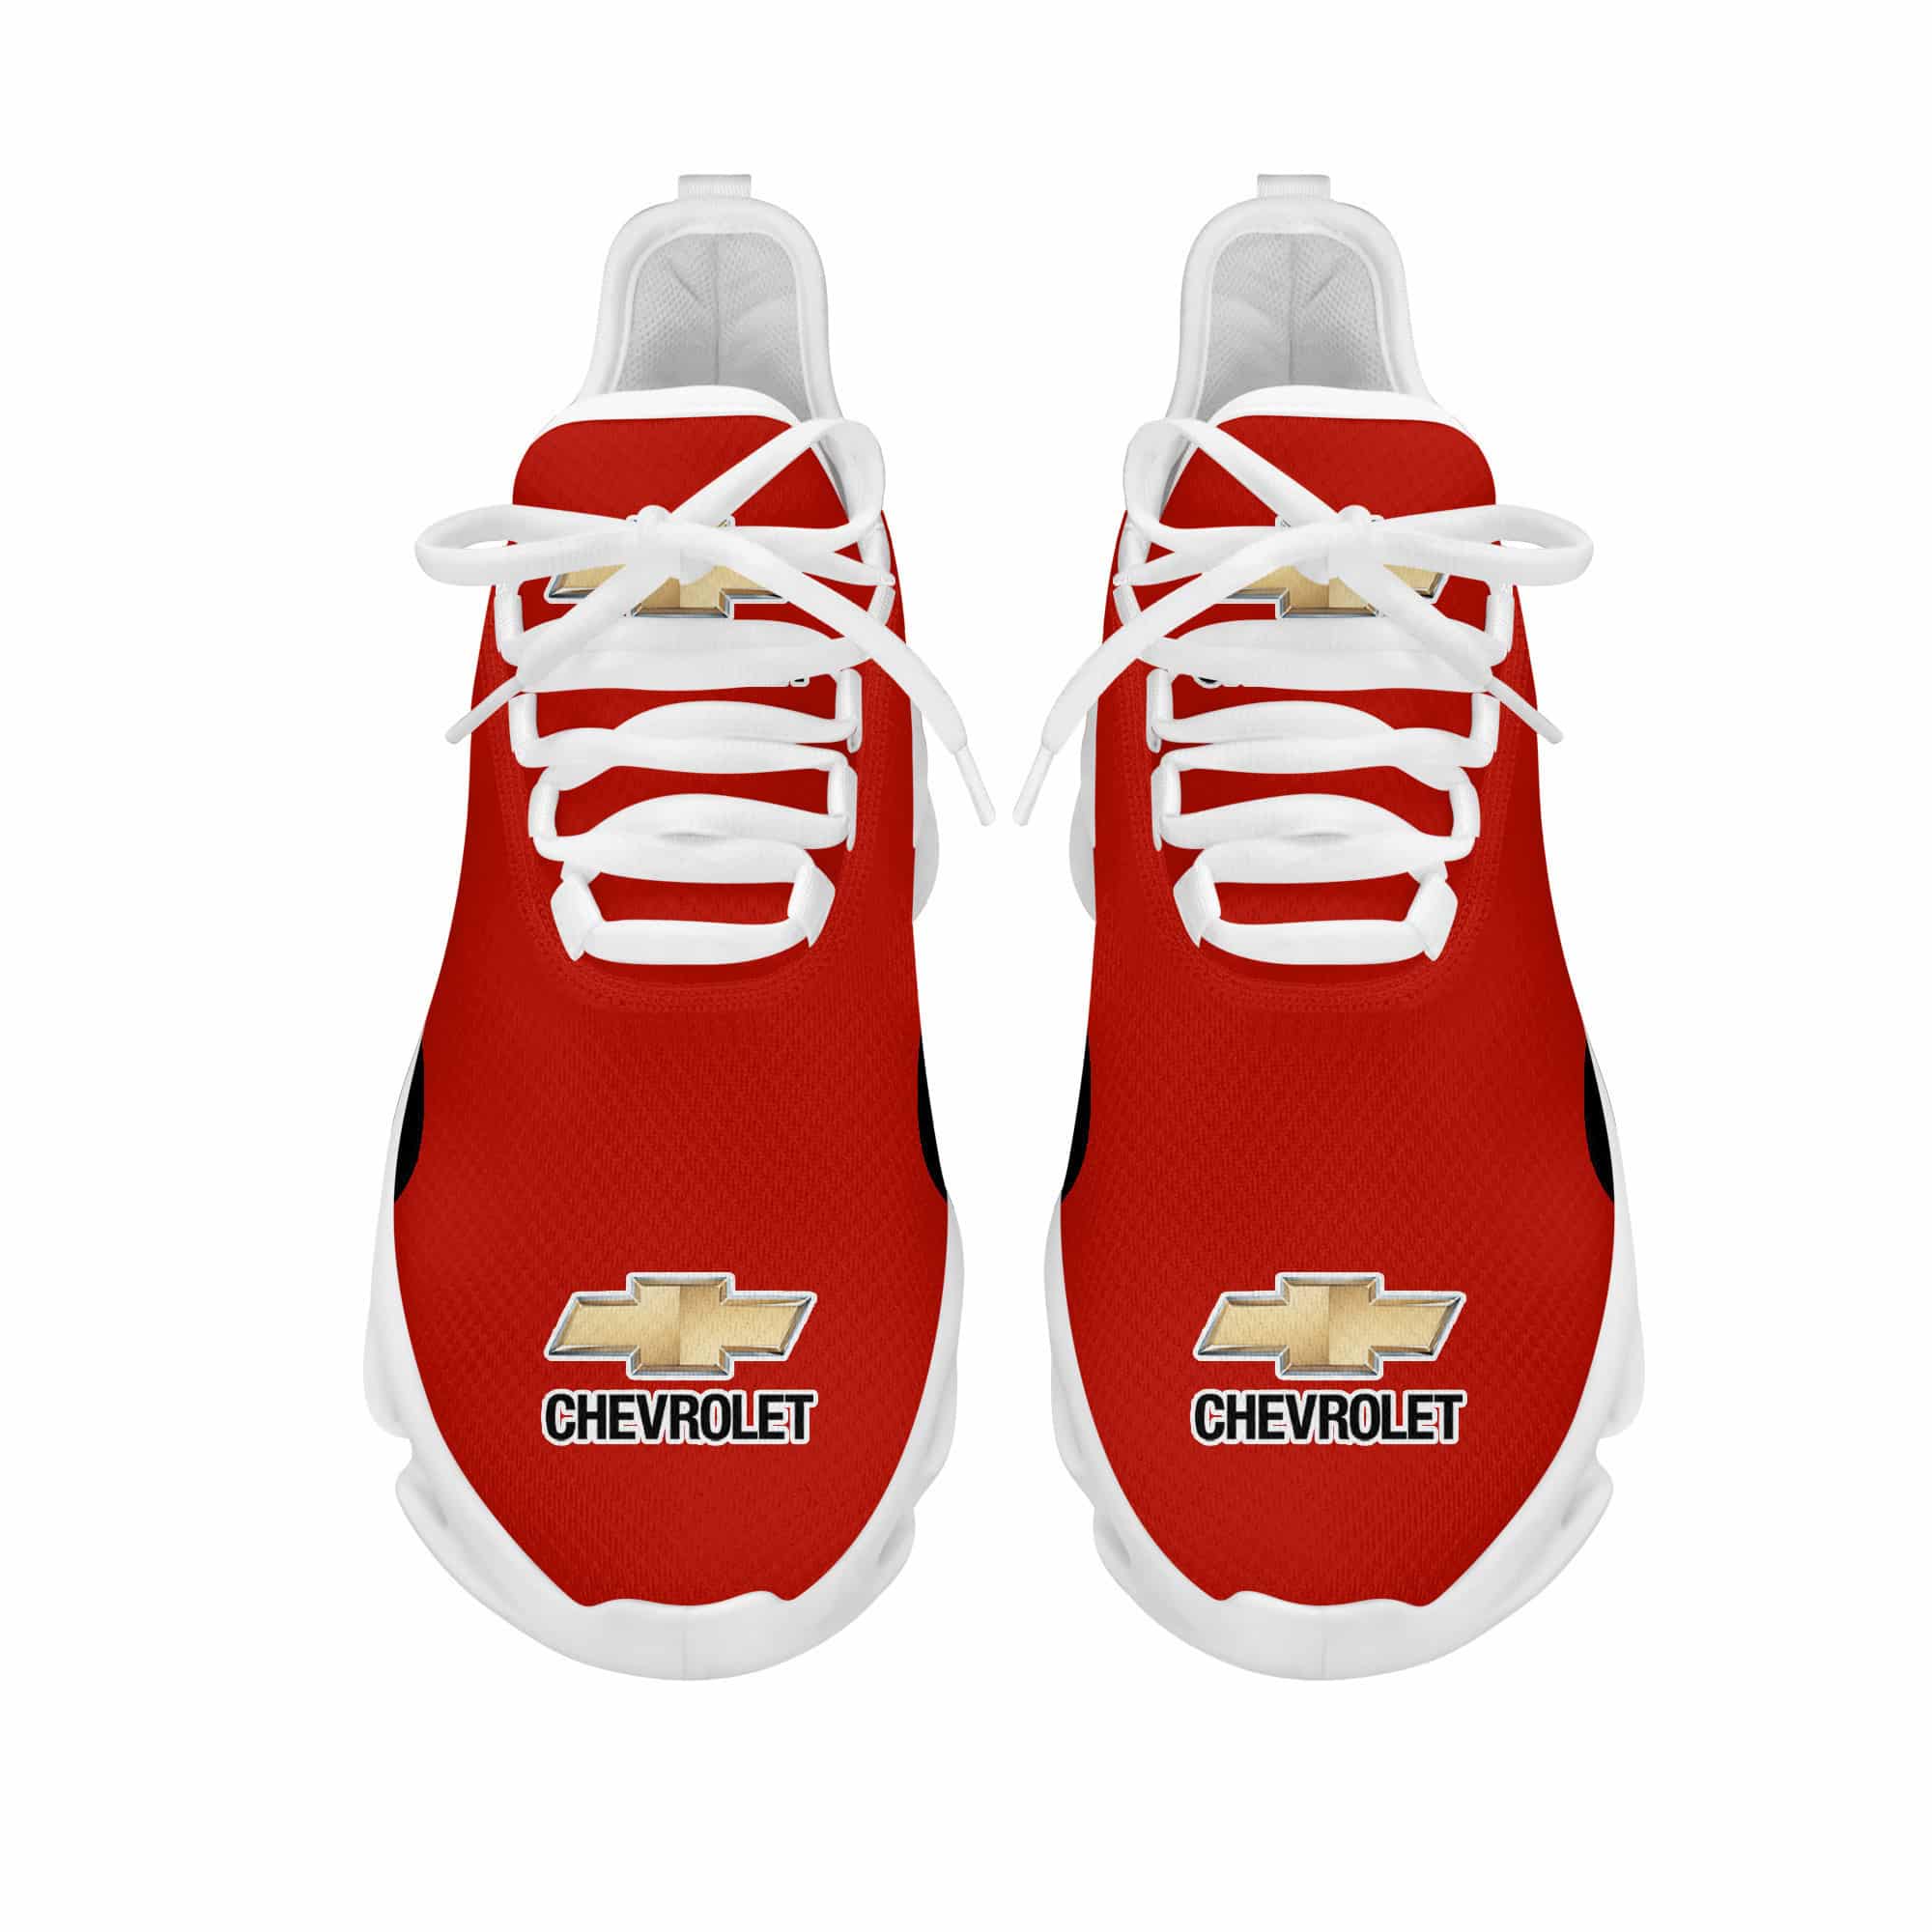 Chevrolet Silverado - Running Shoes Max Soul Shoes Sneakers Ver 1 (Red) 4